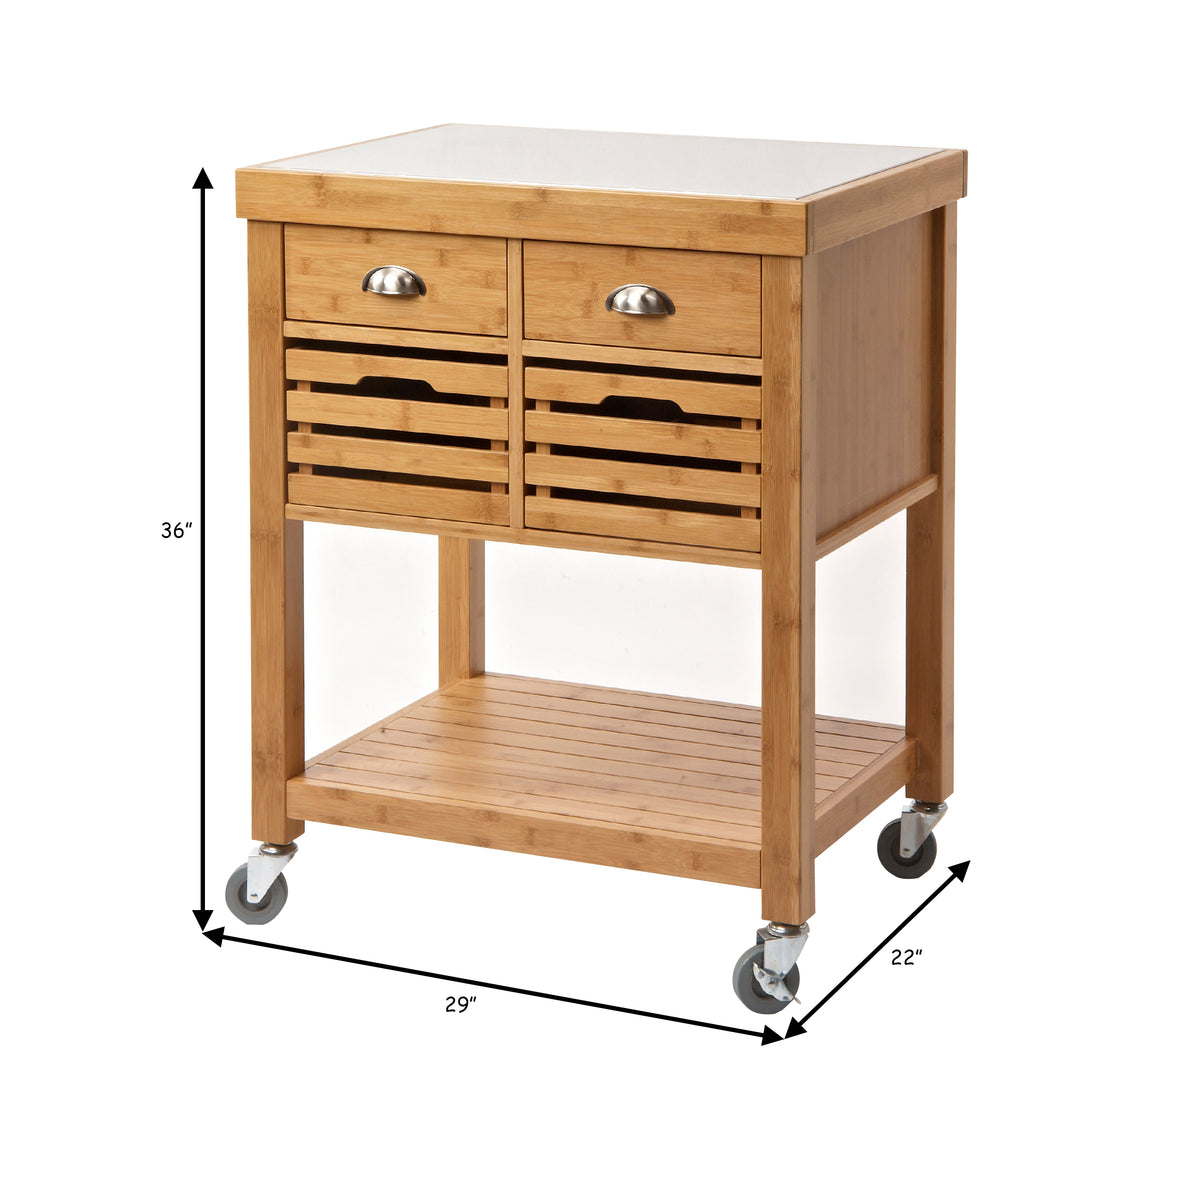 36 Inch Bamboo Kitchen Cart Island, 2 Drawers, Stainless Steel Top, Brown - BM274344